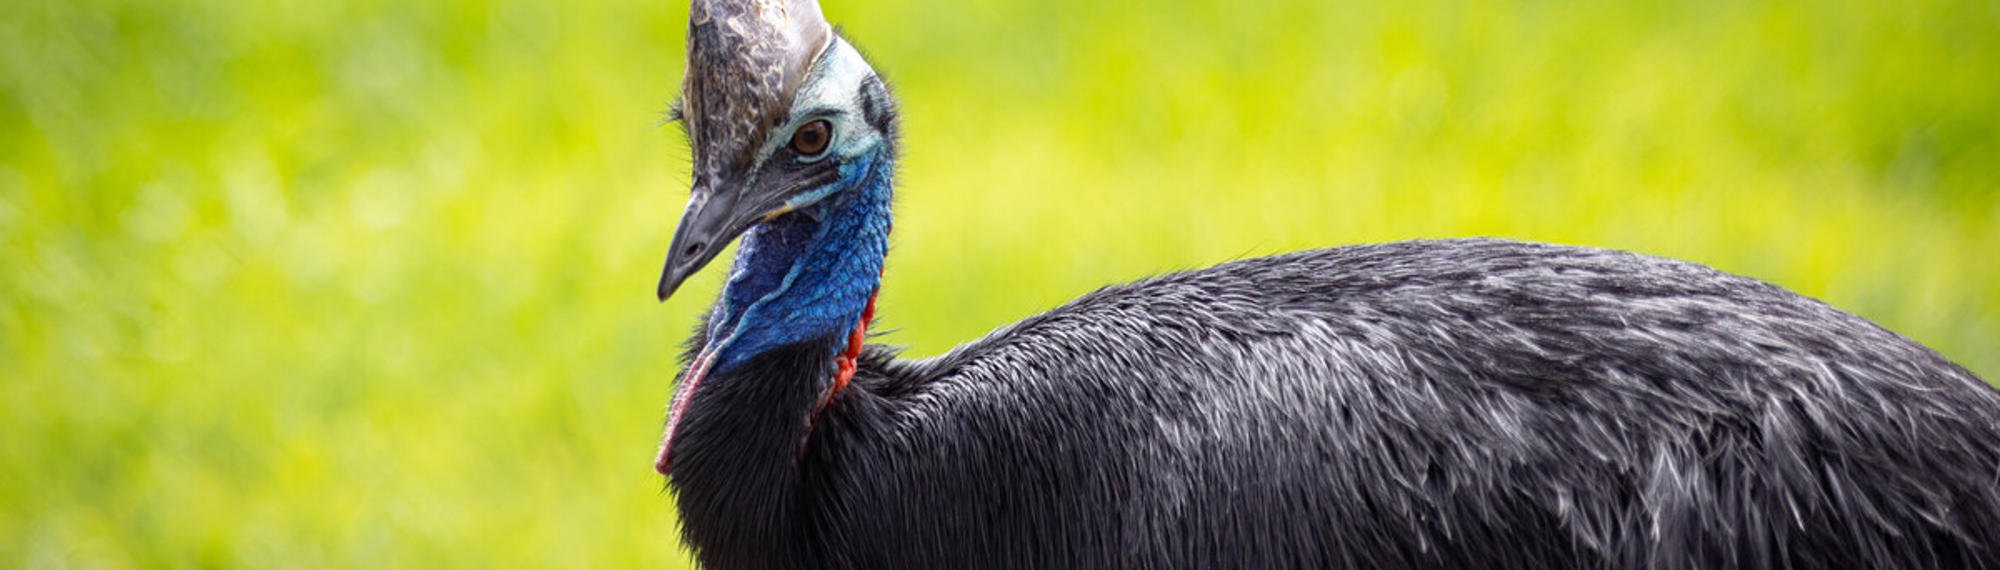 Side profile view of a Southern Cassowary on green grass. It has a large horn on its head with a blue neck and dark black feathers